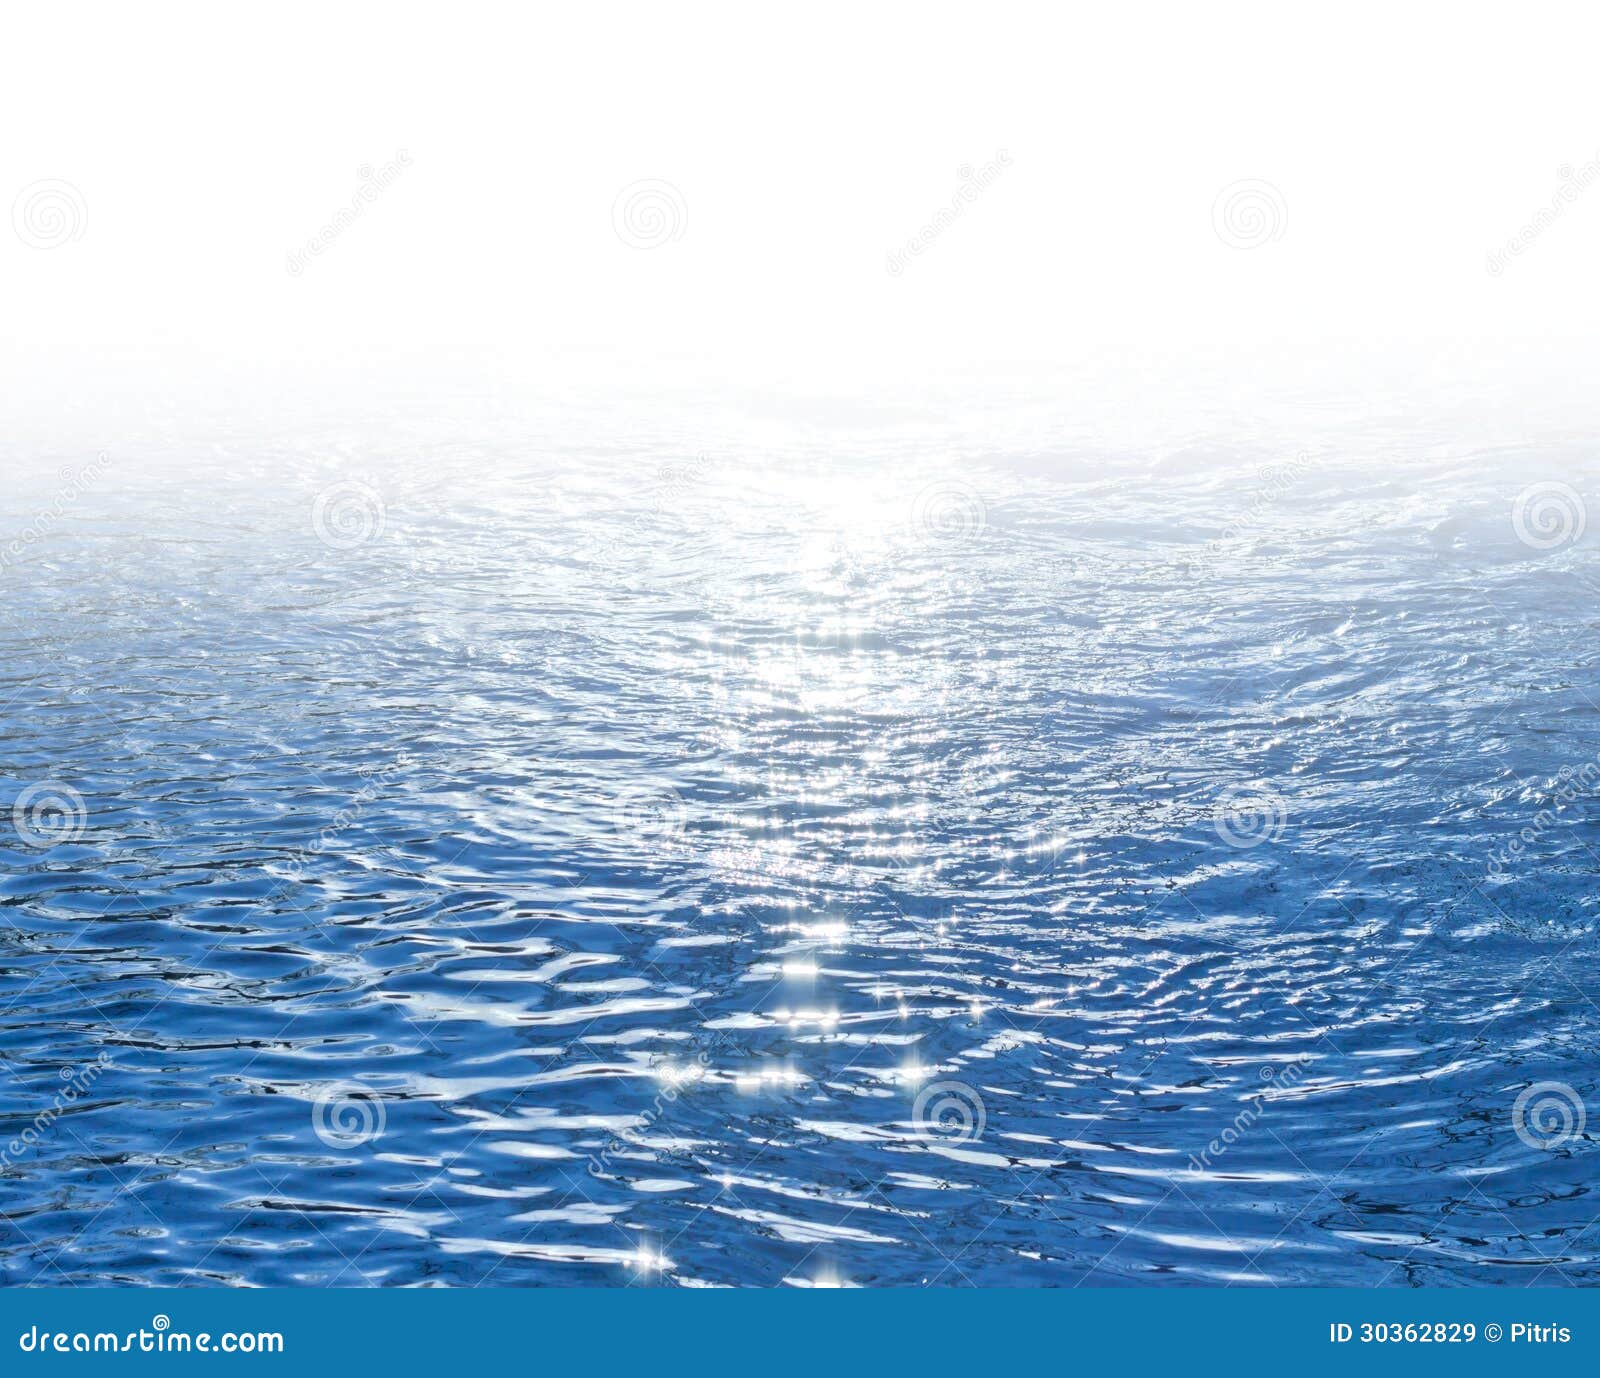 Blue Shimmering Seawater Background Royalty Free Stock Images - Image ...